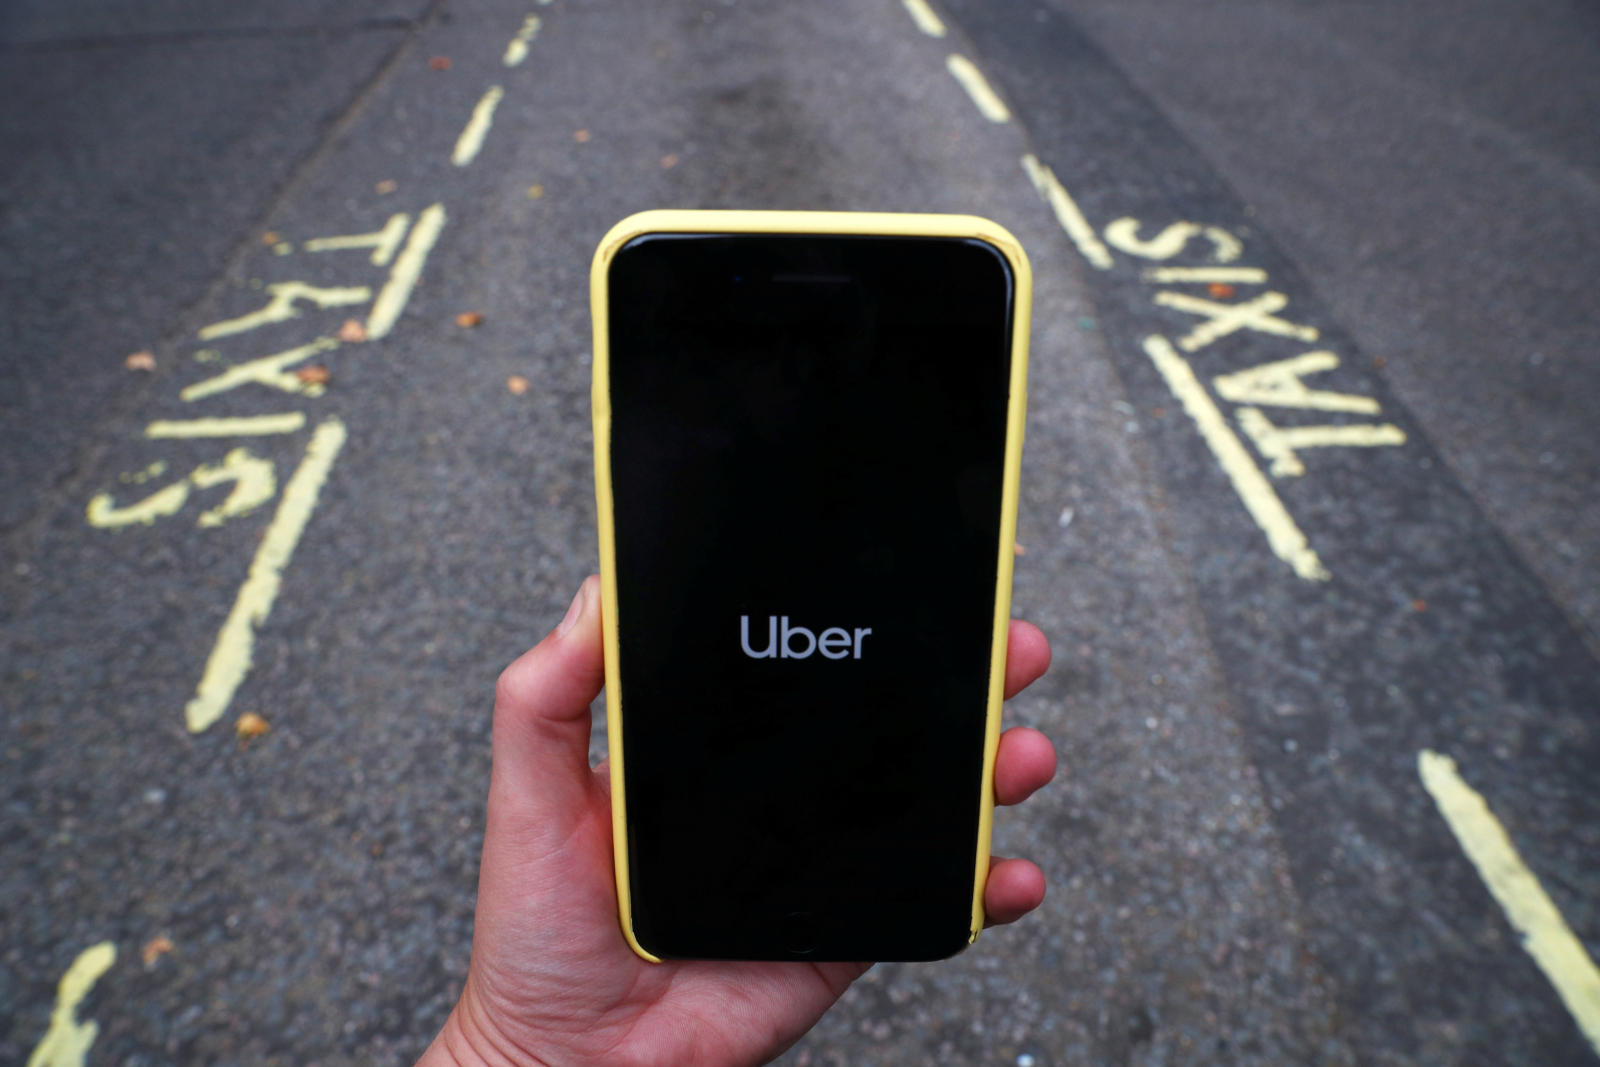 Uber IPO valued at $120 billion, worth more than Ford and General Motors - report1600 x 1067